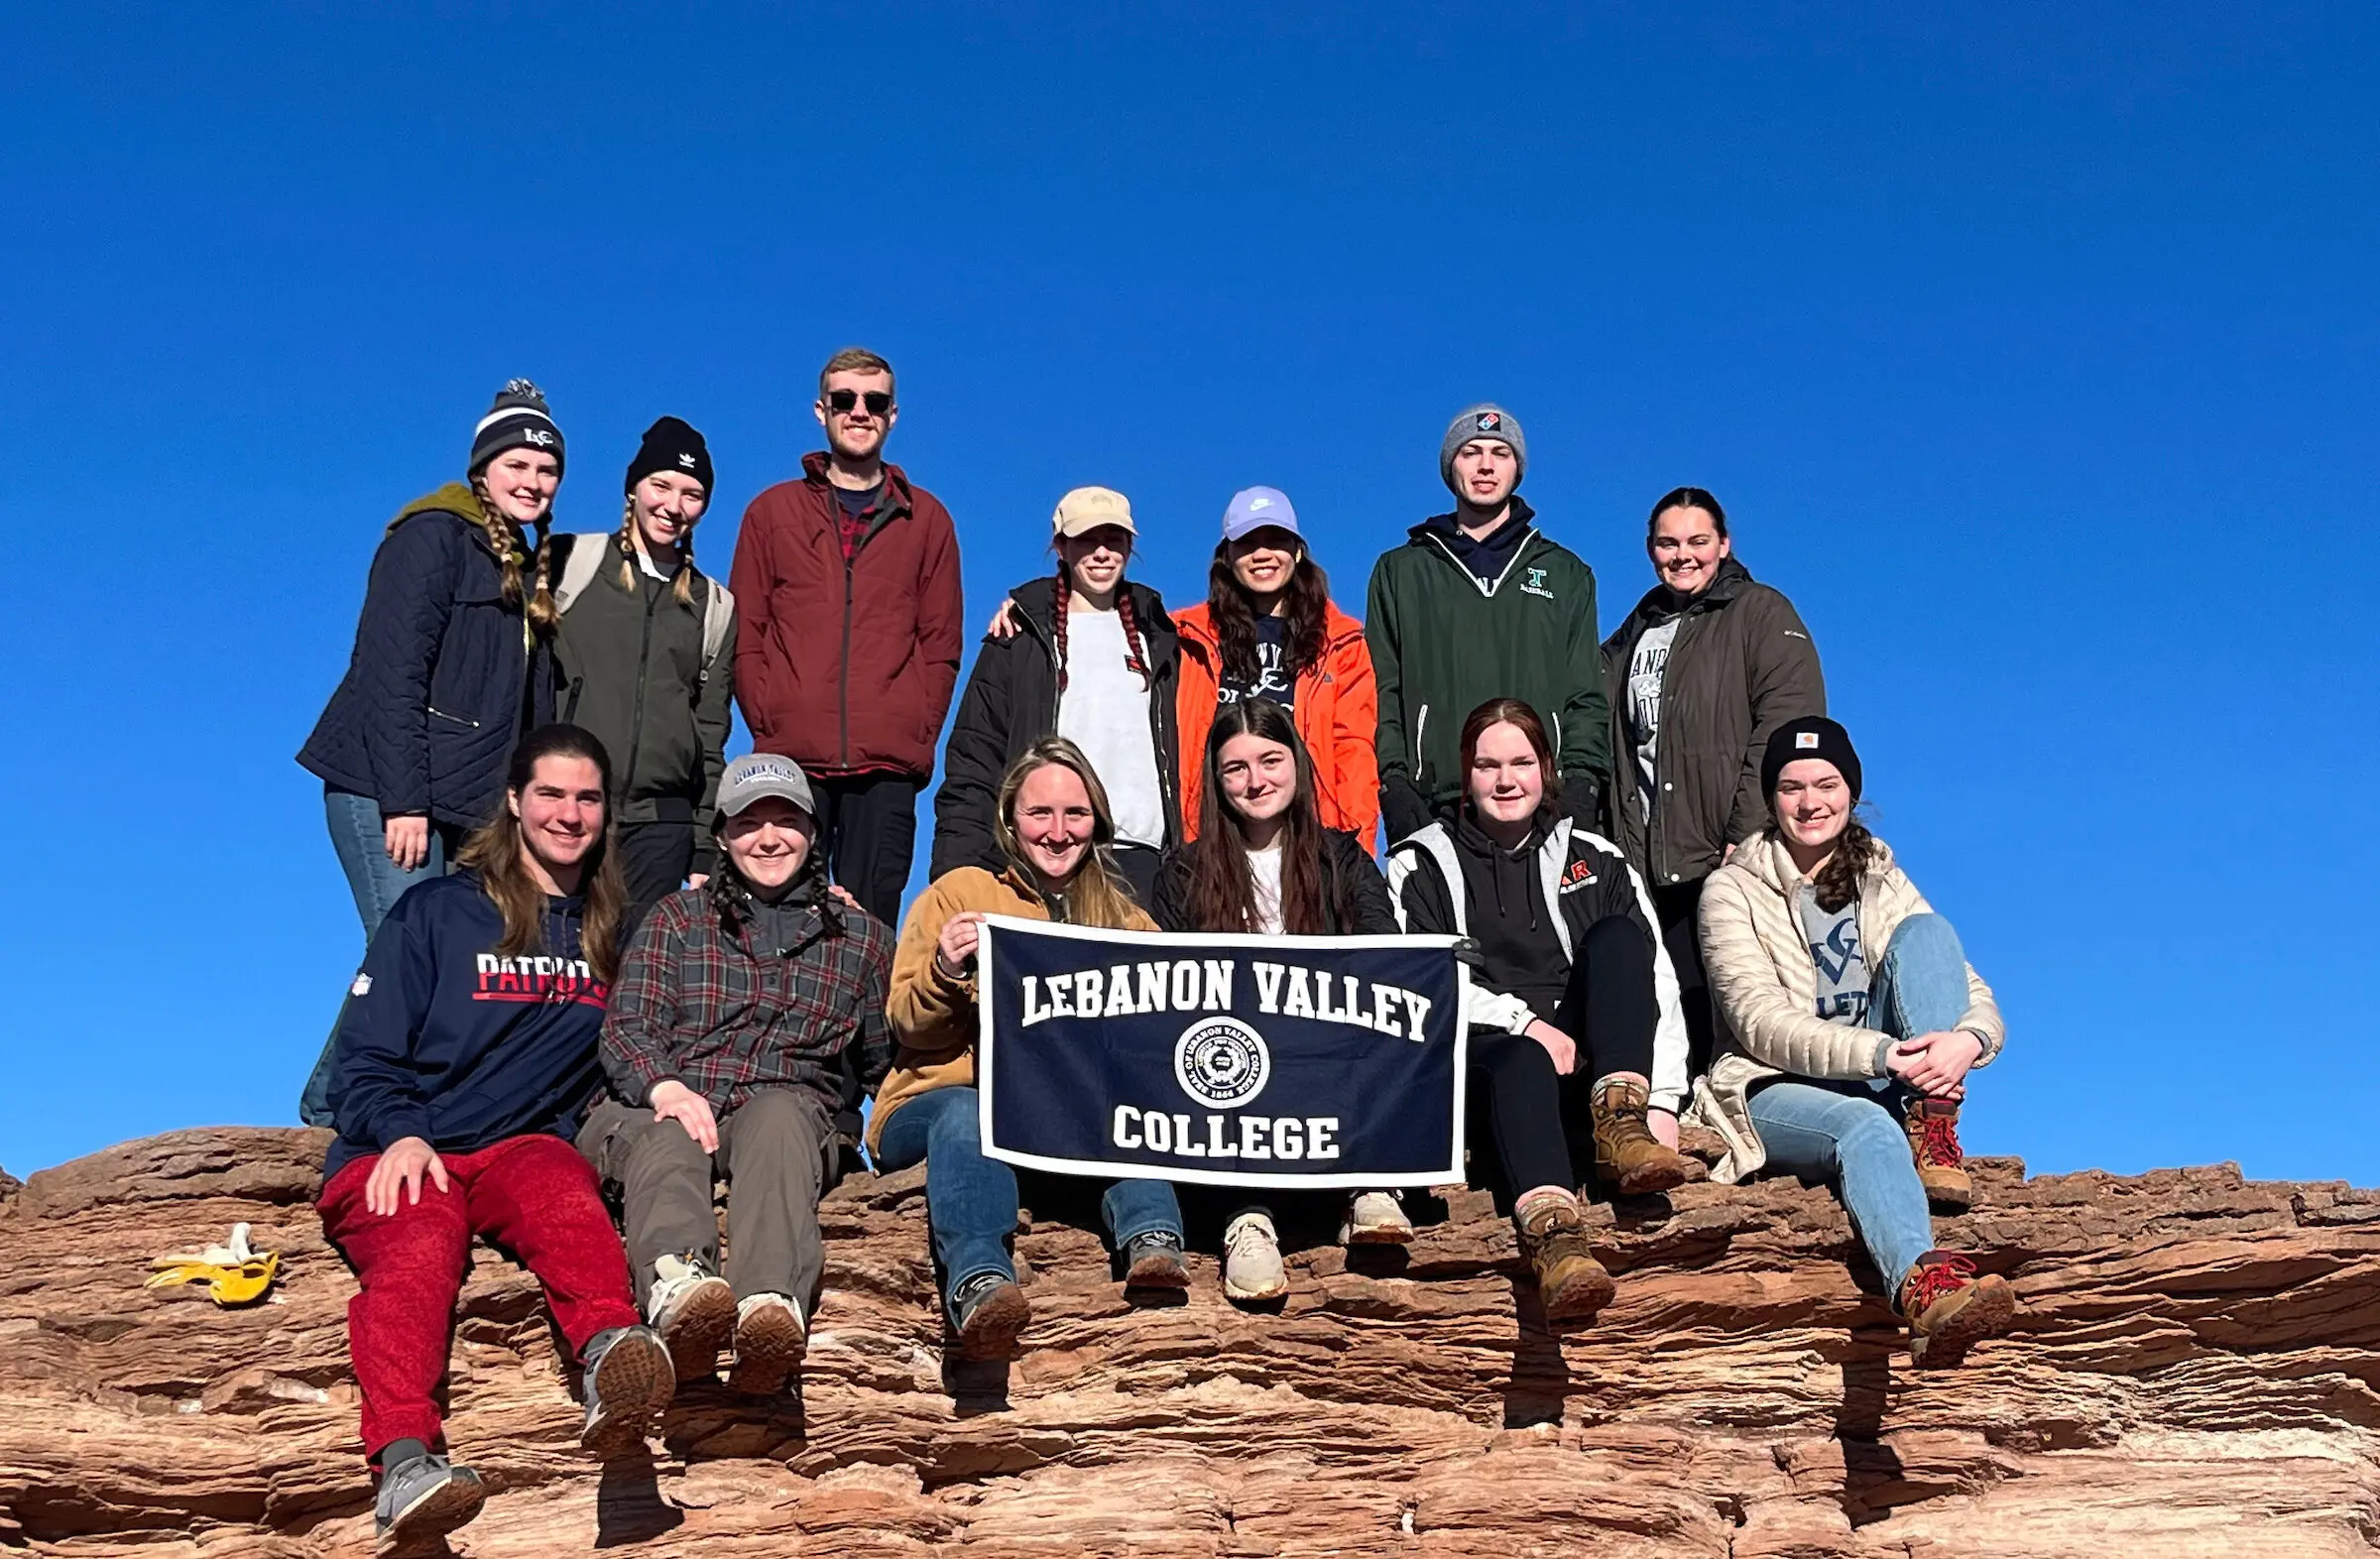 Students pose with LVC banner during community service trip to Arizona